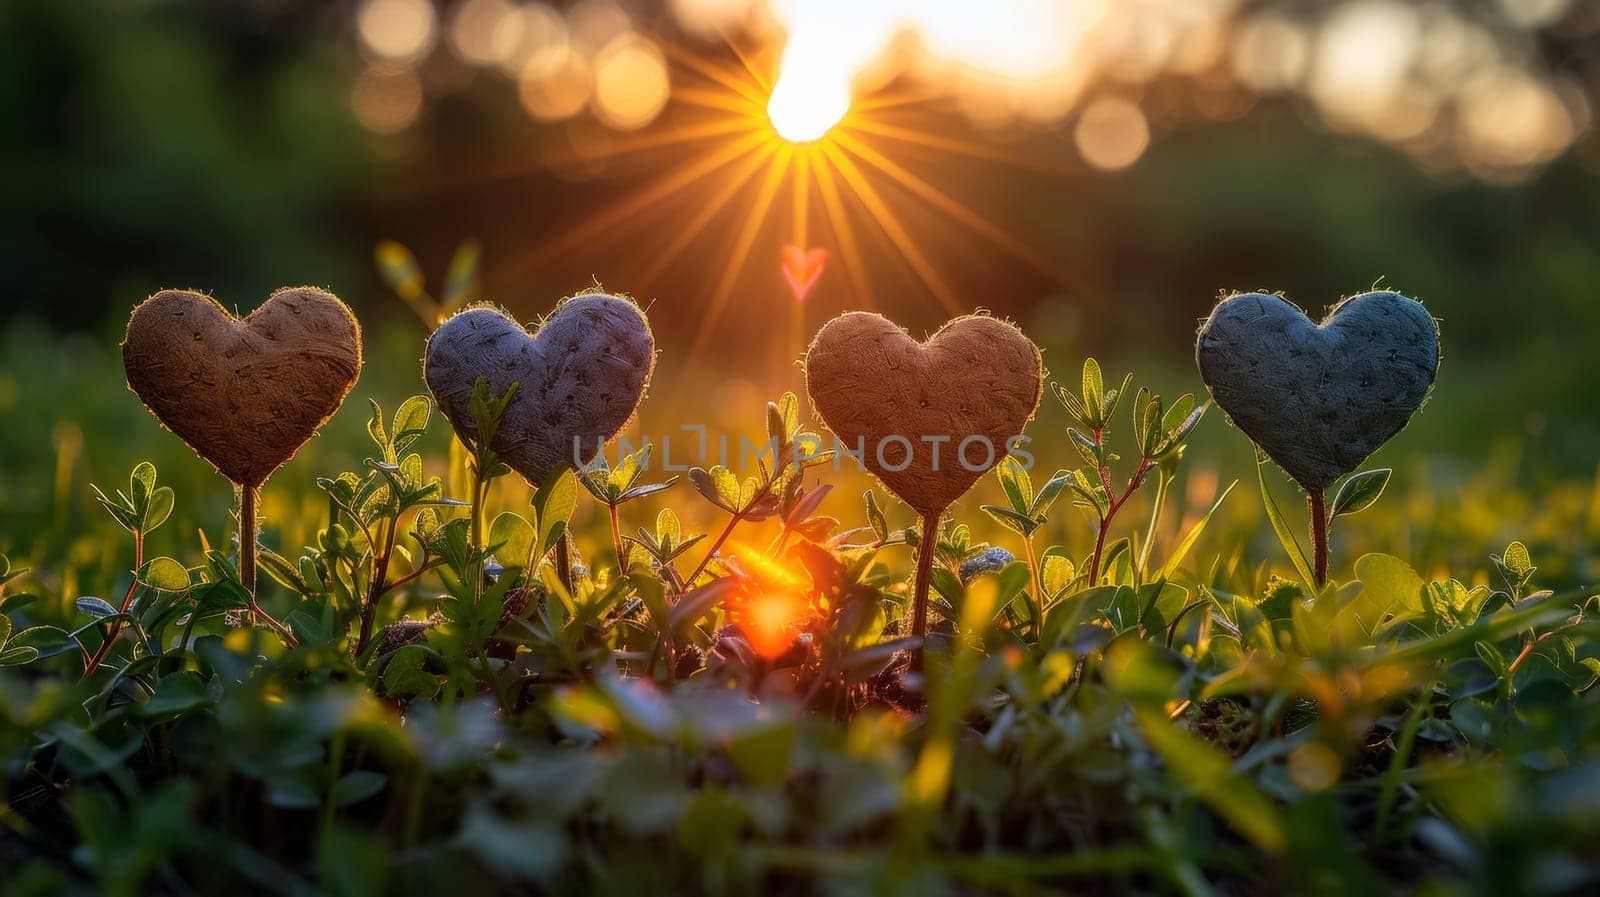 Three heart shaped cookies are sitting in the grass with a sun setting behind them